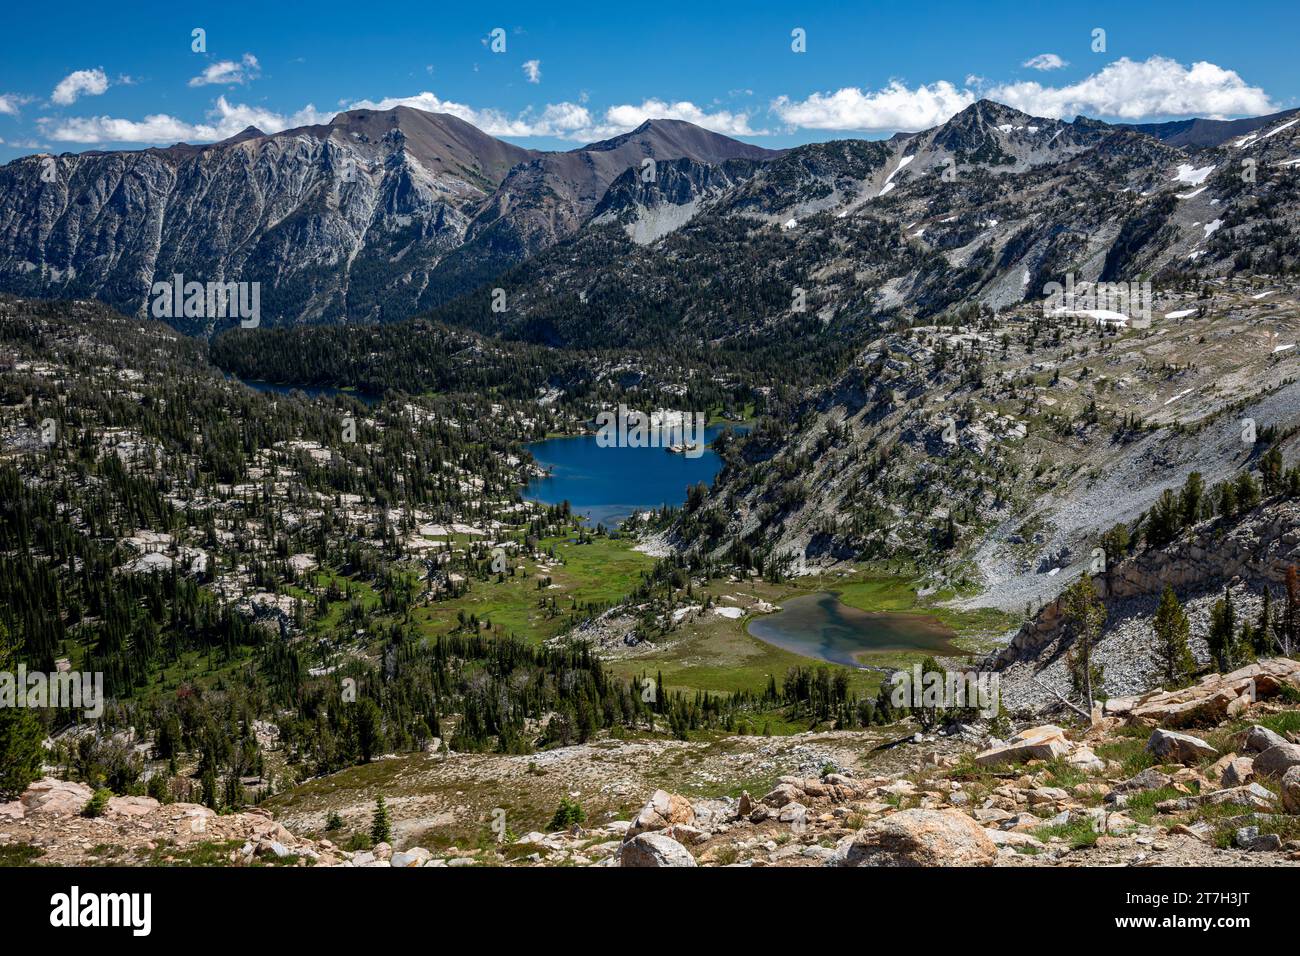 OR02743-00...OREGON - View of the Lakes Basin including Mirror and Moccasin Lakes in the Eagle Cap Wilderness area. Stock Photo